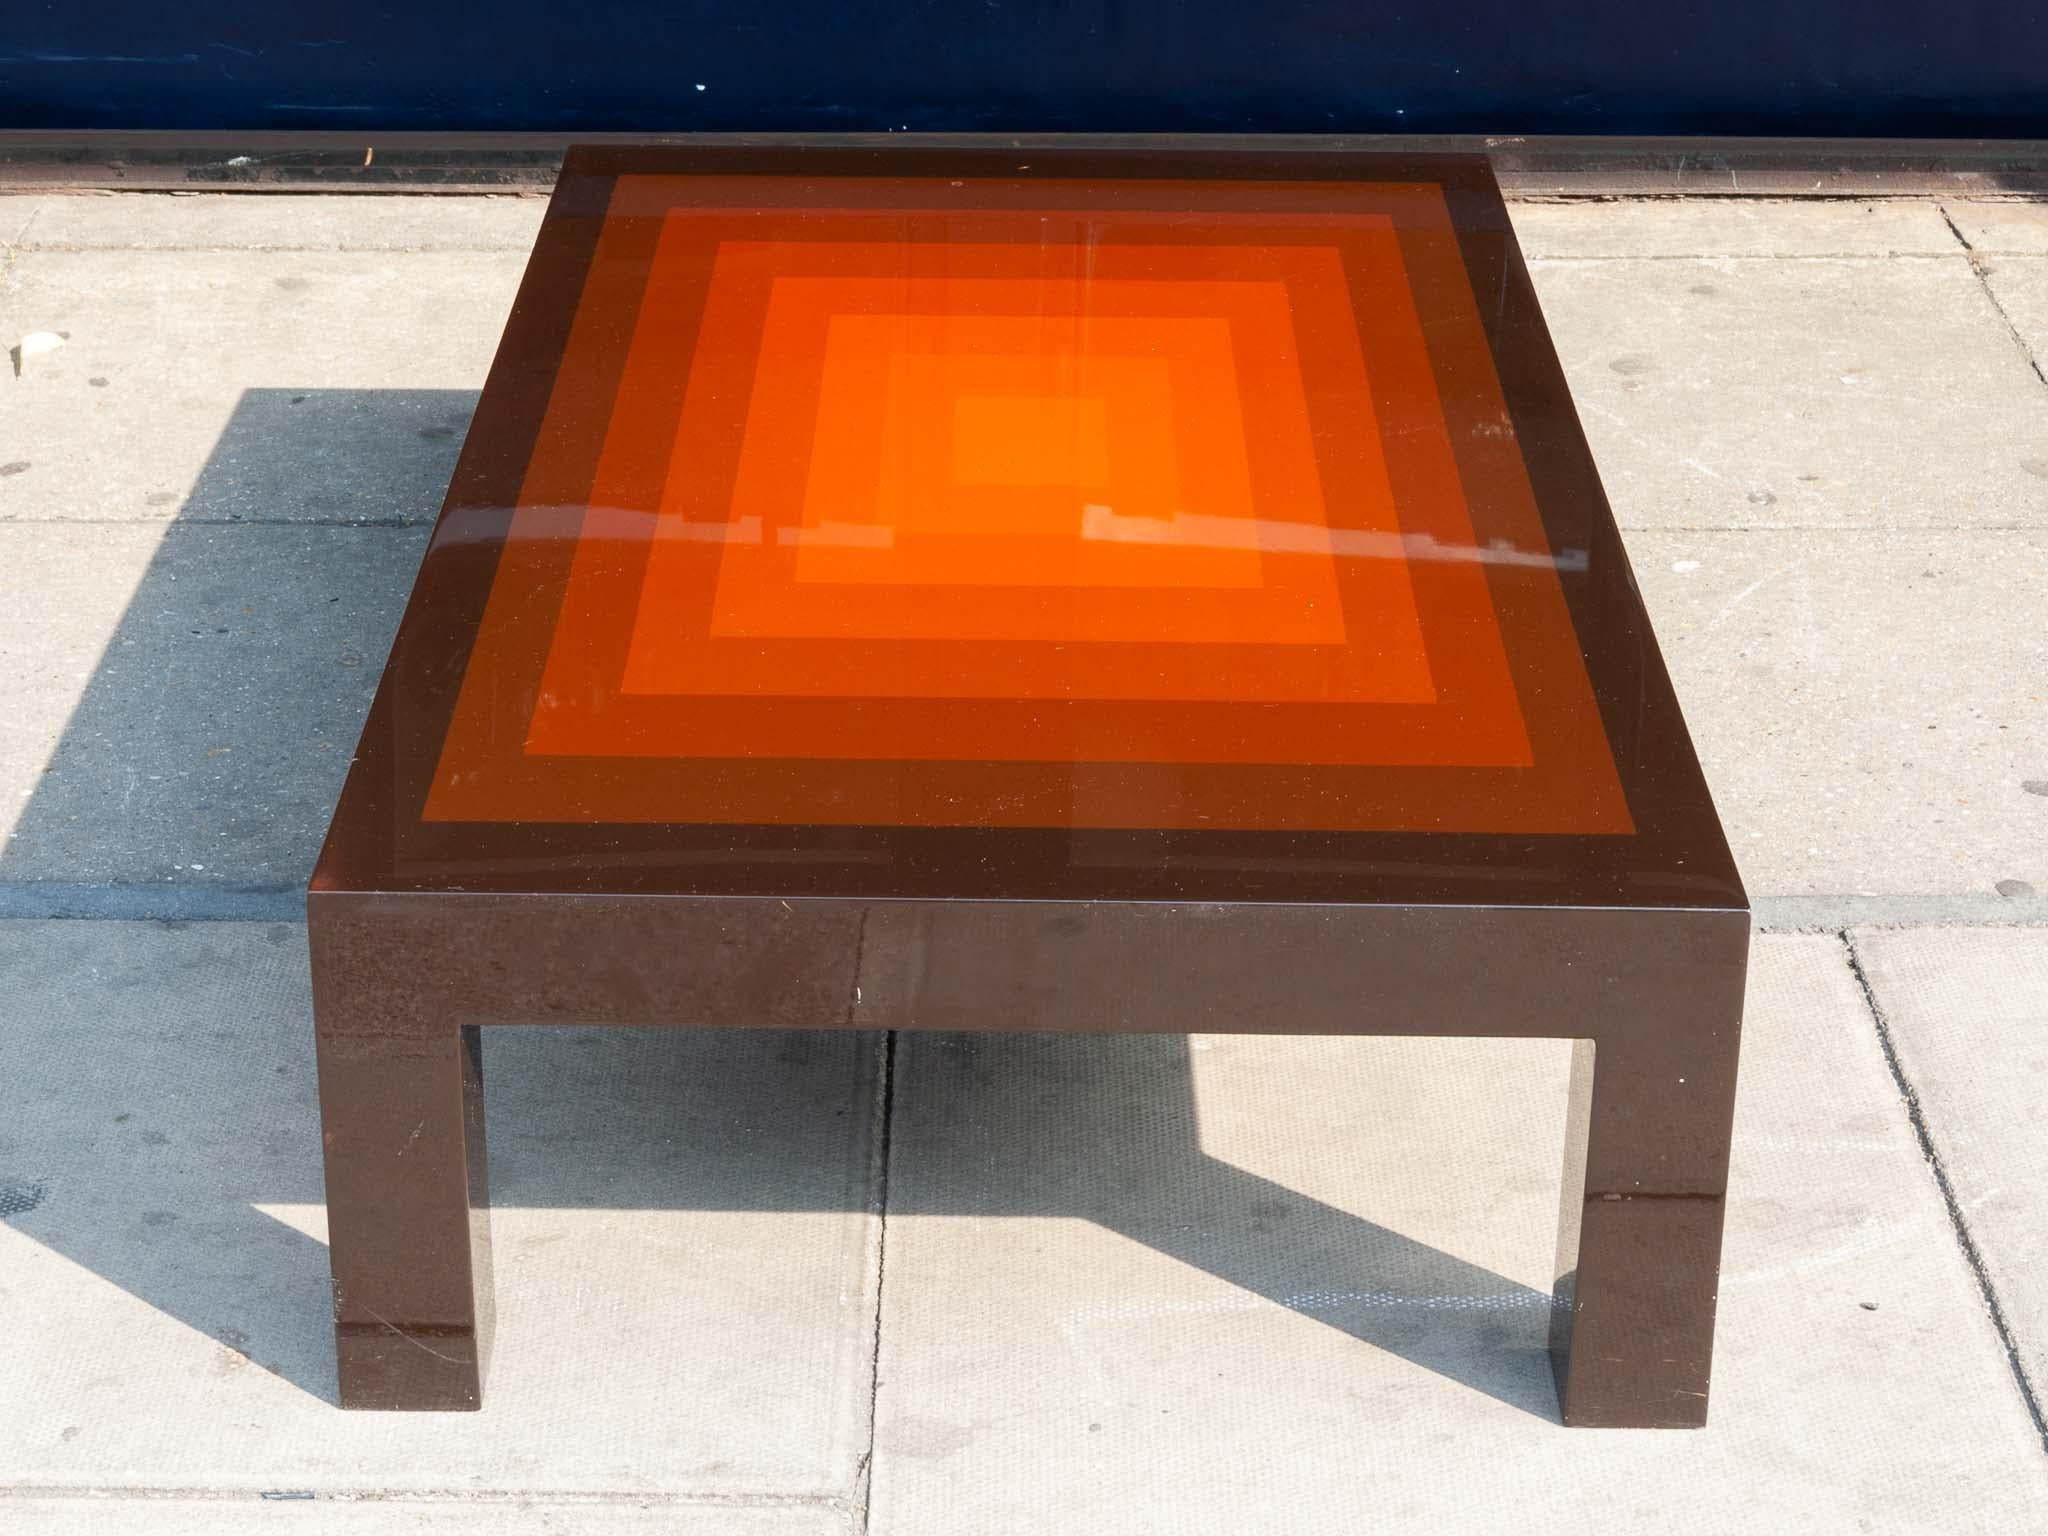 Polished 1970s Rectangular Multi-Colored Brown and Orange High Gloss Coffee Table